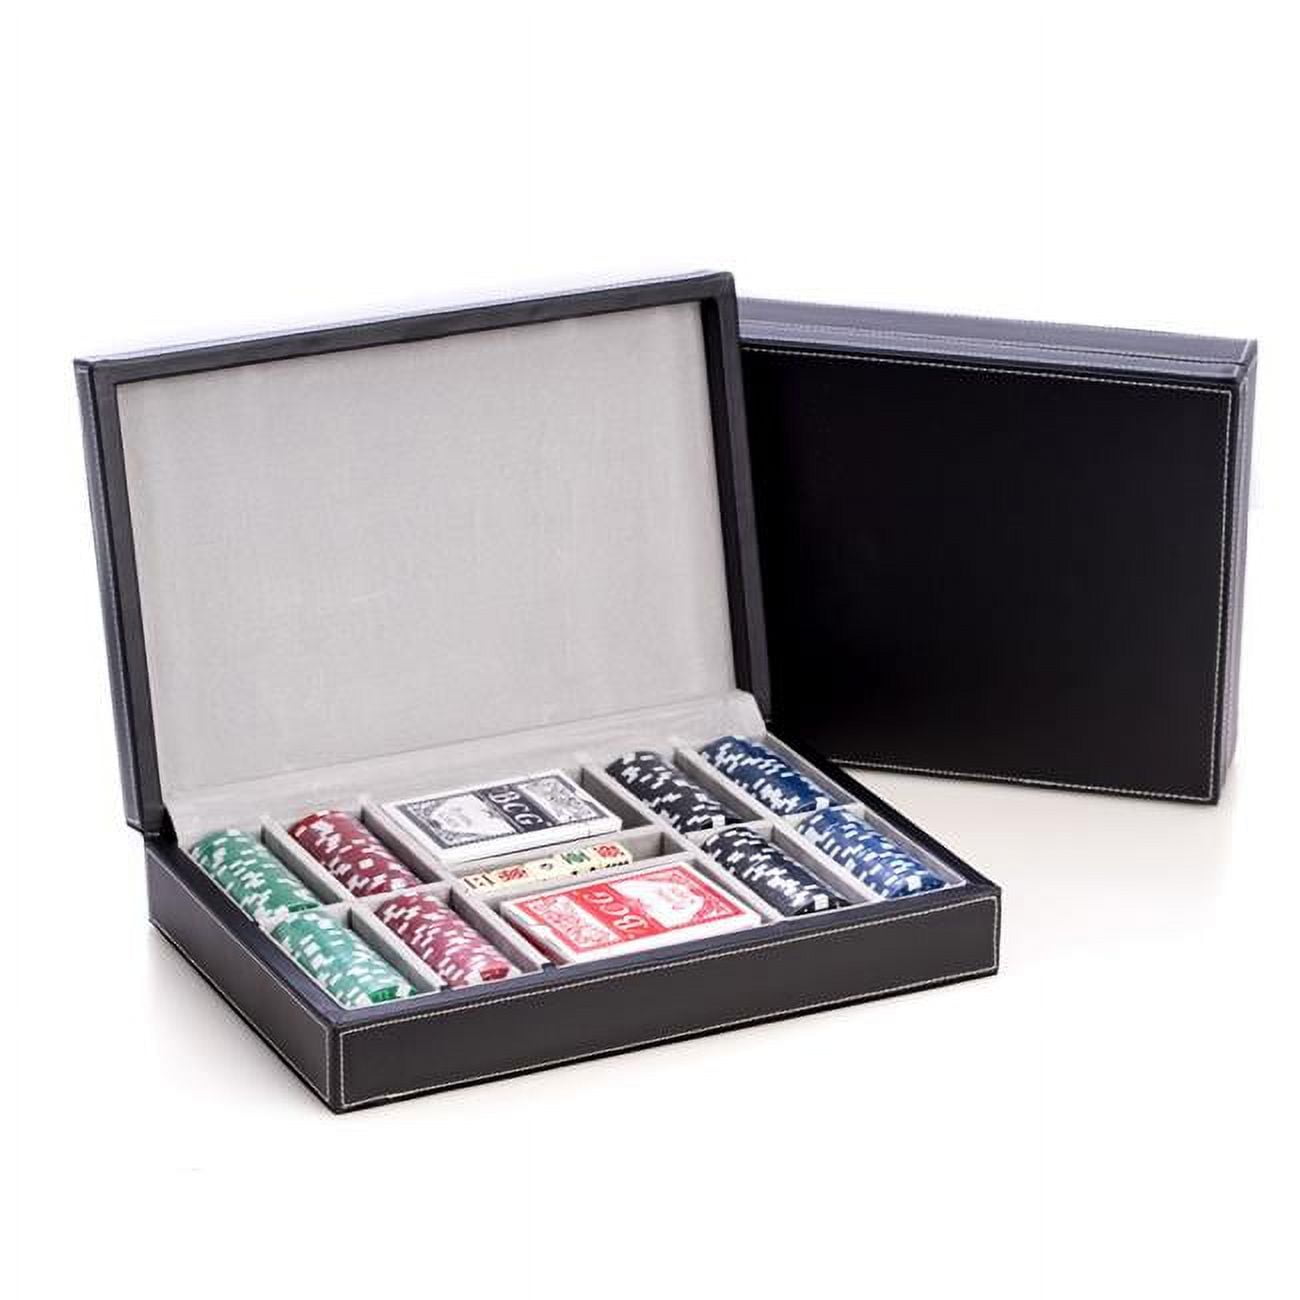 Bey Berk International Bey-Berk International G535 Poker Set with 200 Chips in Leather Case, Black